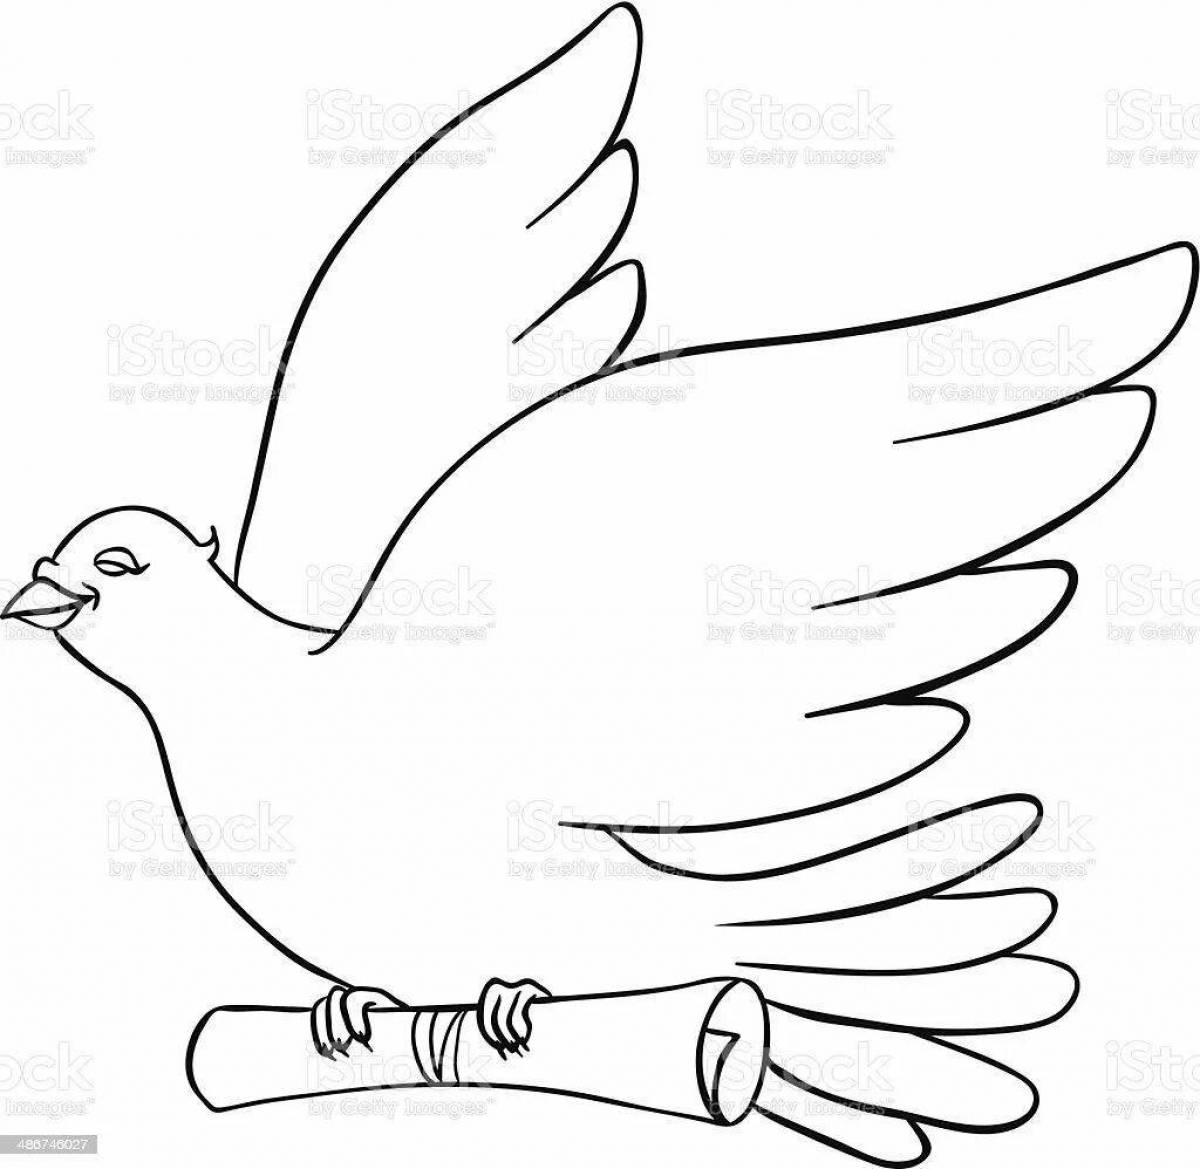 Coloring page elegant carrier pigeon